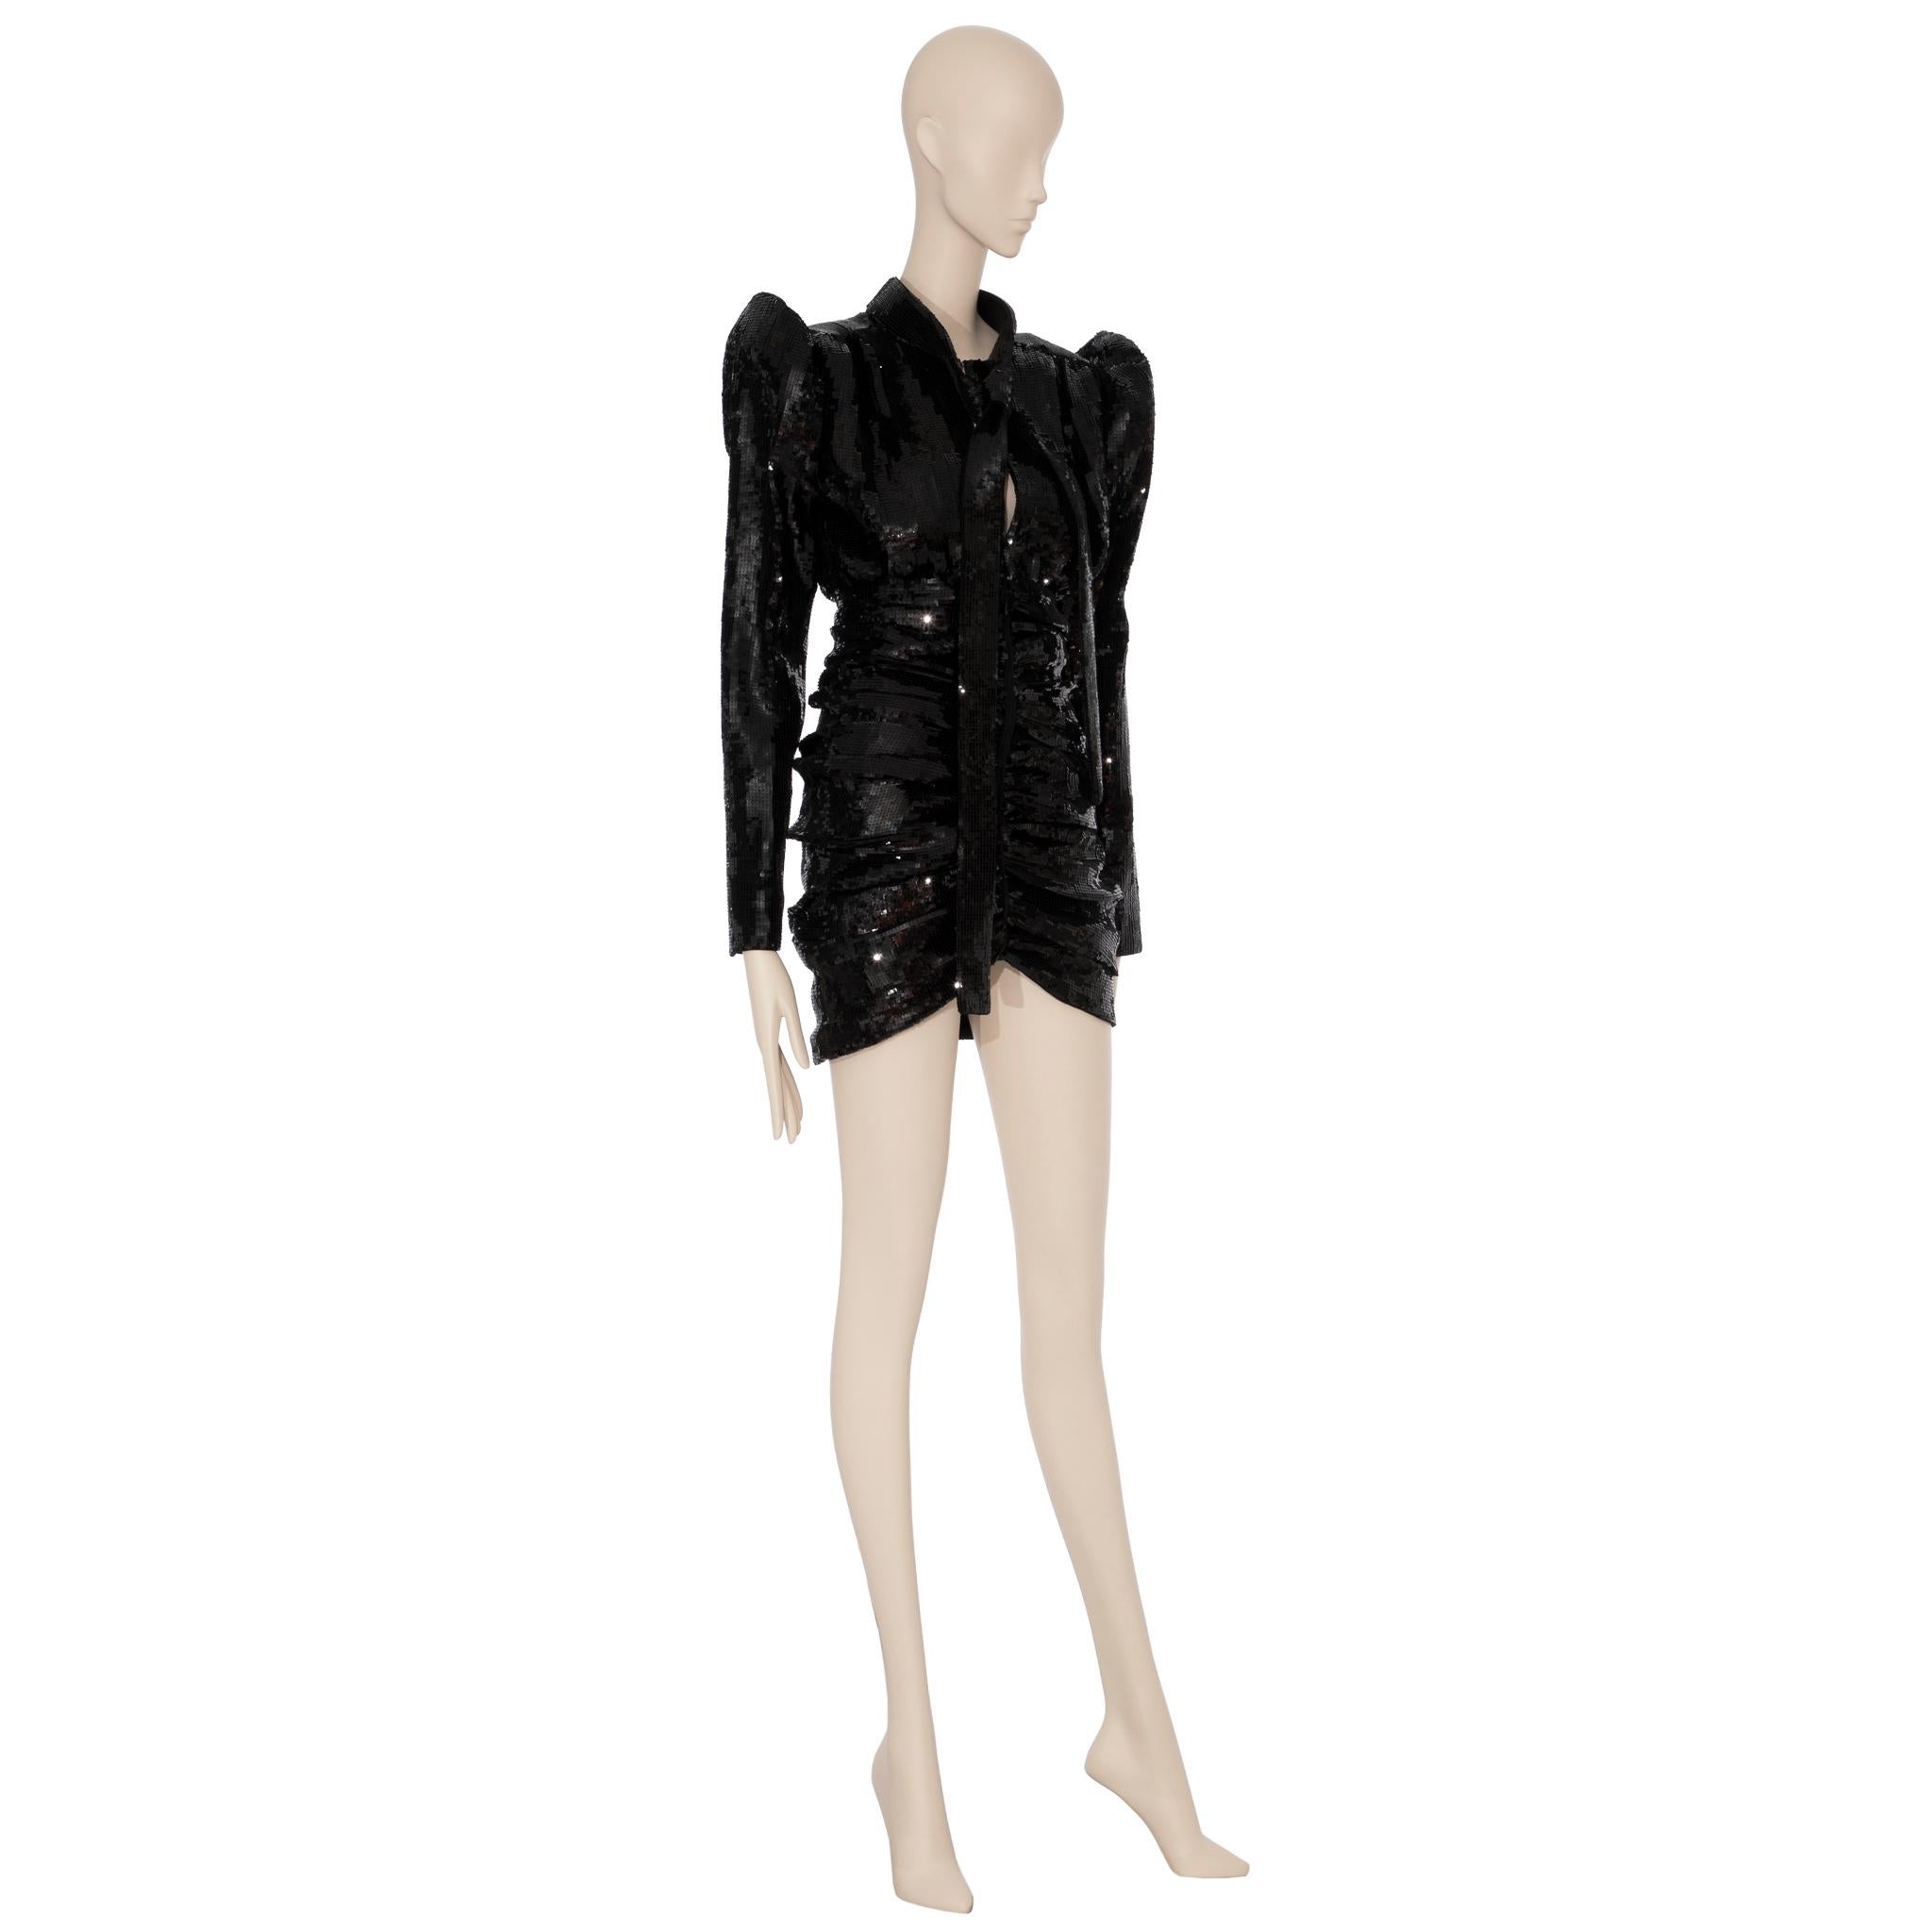 This Yves Saint Laurent long sleeve evening cocktail dress is perfect for any special event. Its shimmering sequin material adds a touch of glamour and will make you stand out from the crowd. Don't miss out on this 38 Fr piece that will guarantee